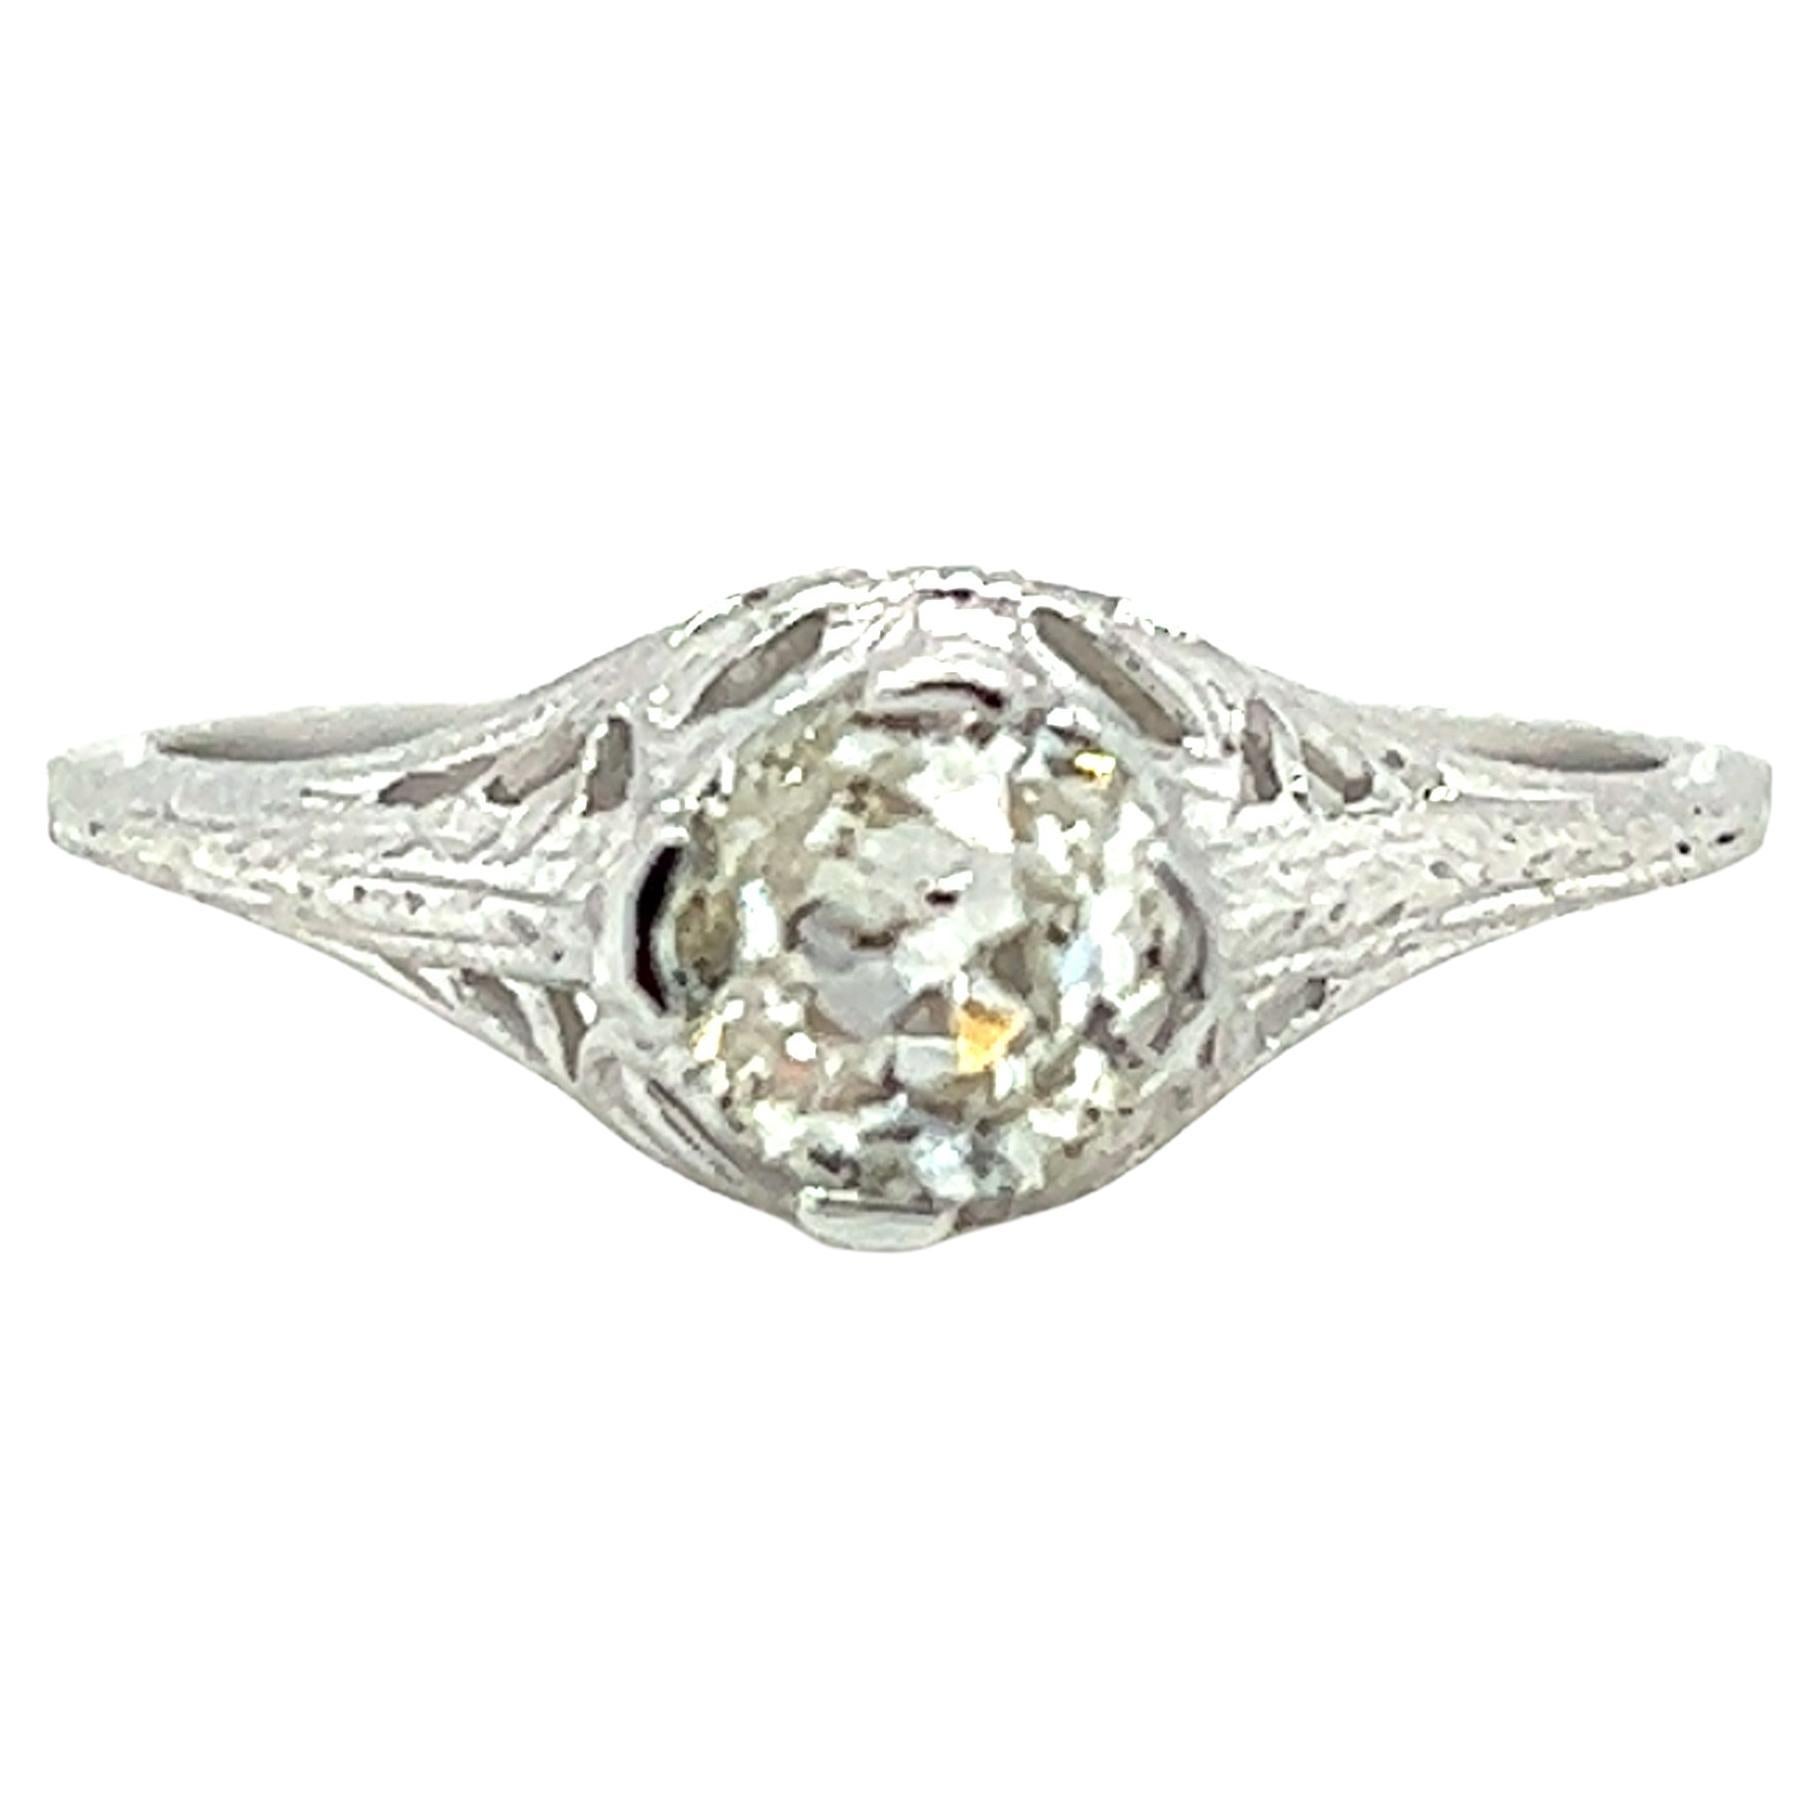 Art Deco 0.57 Ct Antique Cushion Cut Diamond Engagement Ring in 18k White Gold For Sale